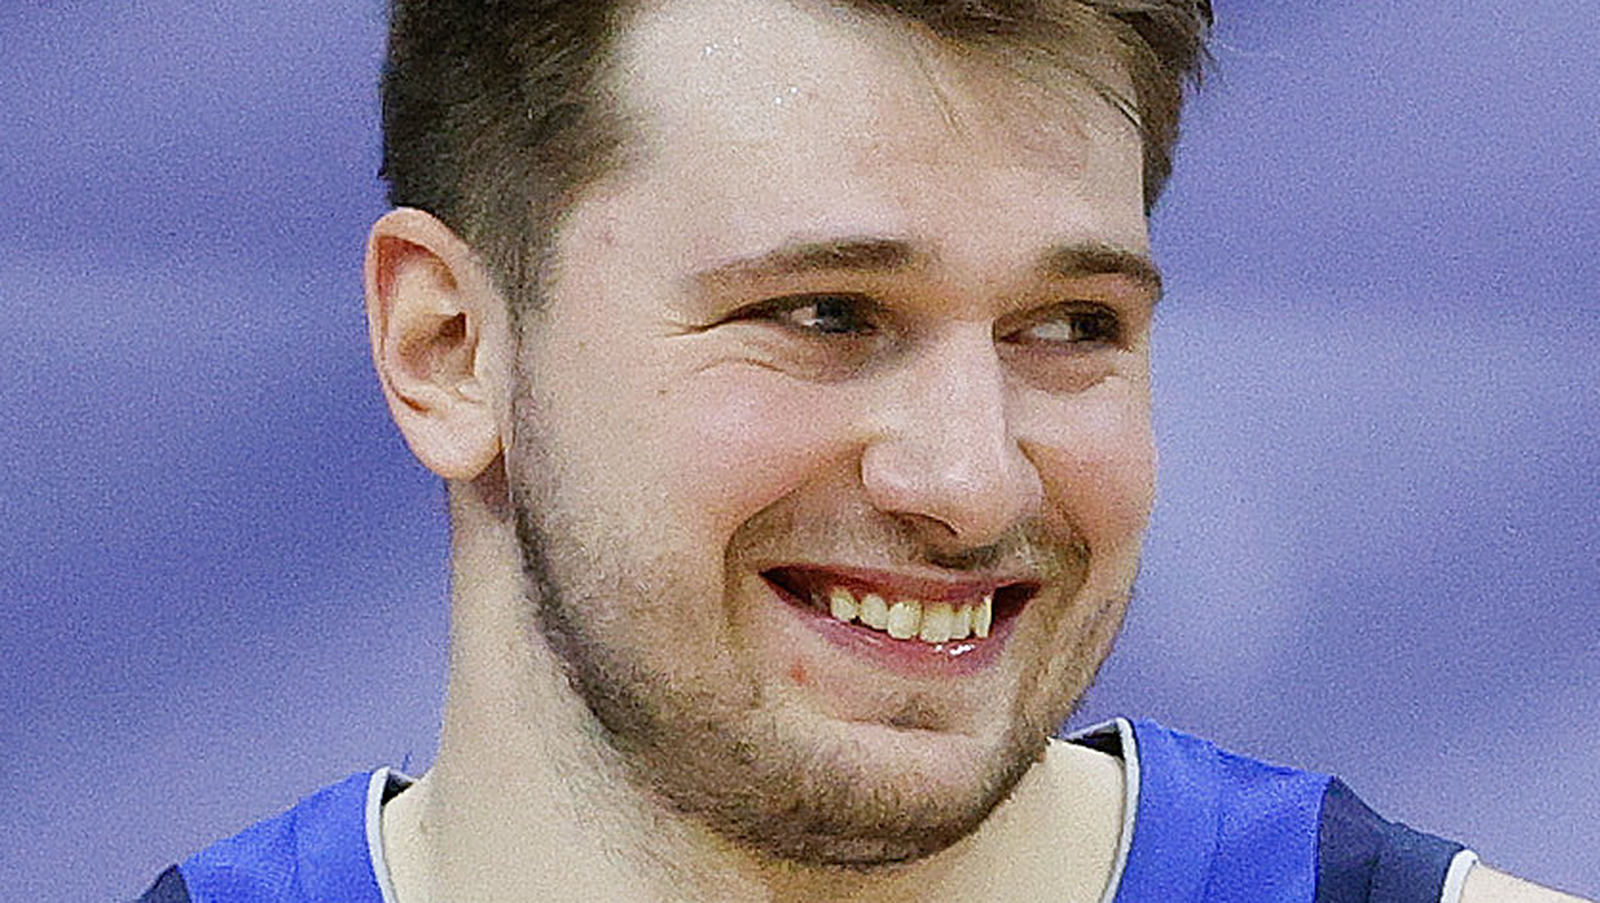 Luka Doncic's Net Worth How Much Does The Mavericks Player Make?